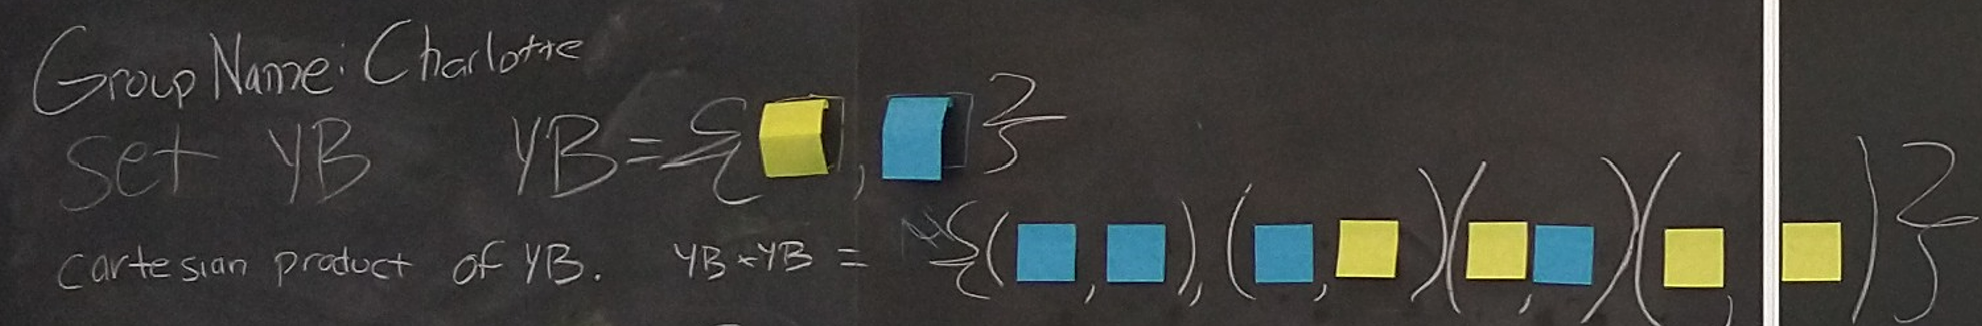 Picture of chalkboard with the following combination of chalk writings and sticky notes: As before, there is the Group name listed as Charlotte; a set named YB defined by placing an actual yellow sticky note comma-separated by an actual blue sticky note within curly brackets; and, the cartesian product of YB with itself, which has four ordered pairs between curly brackets. The first ordered pair contains two blue sticky notes; the second ordered pair has a blue sticky note in the first component and a yellow sticky note in the second component; the third ordered pair is the reverse of the second ordered pair; lastly, the fourth ordered pairs has two yellow stickyn notes.